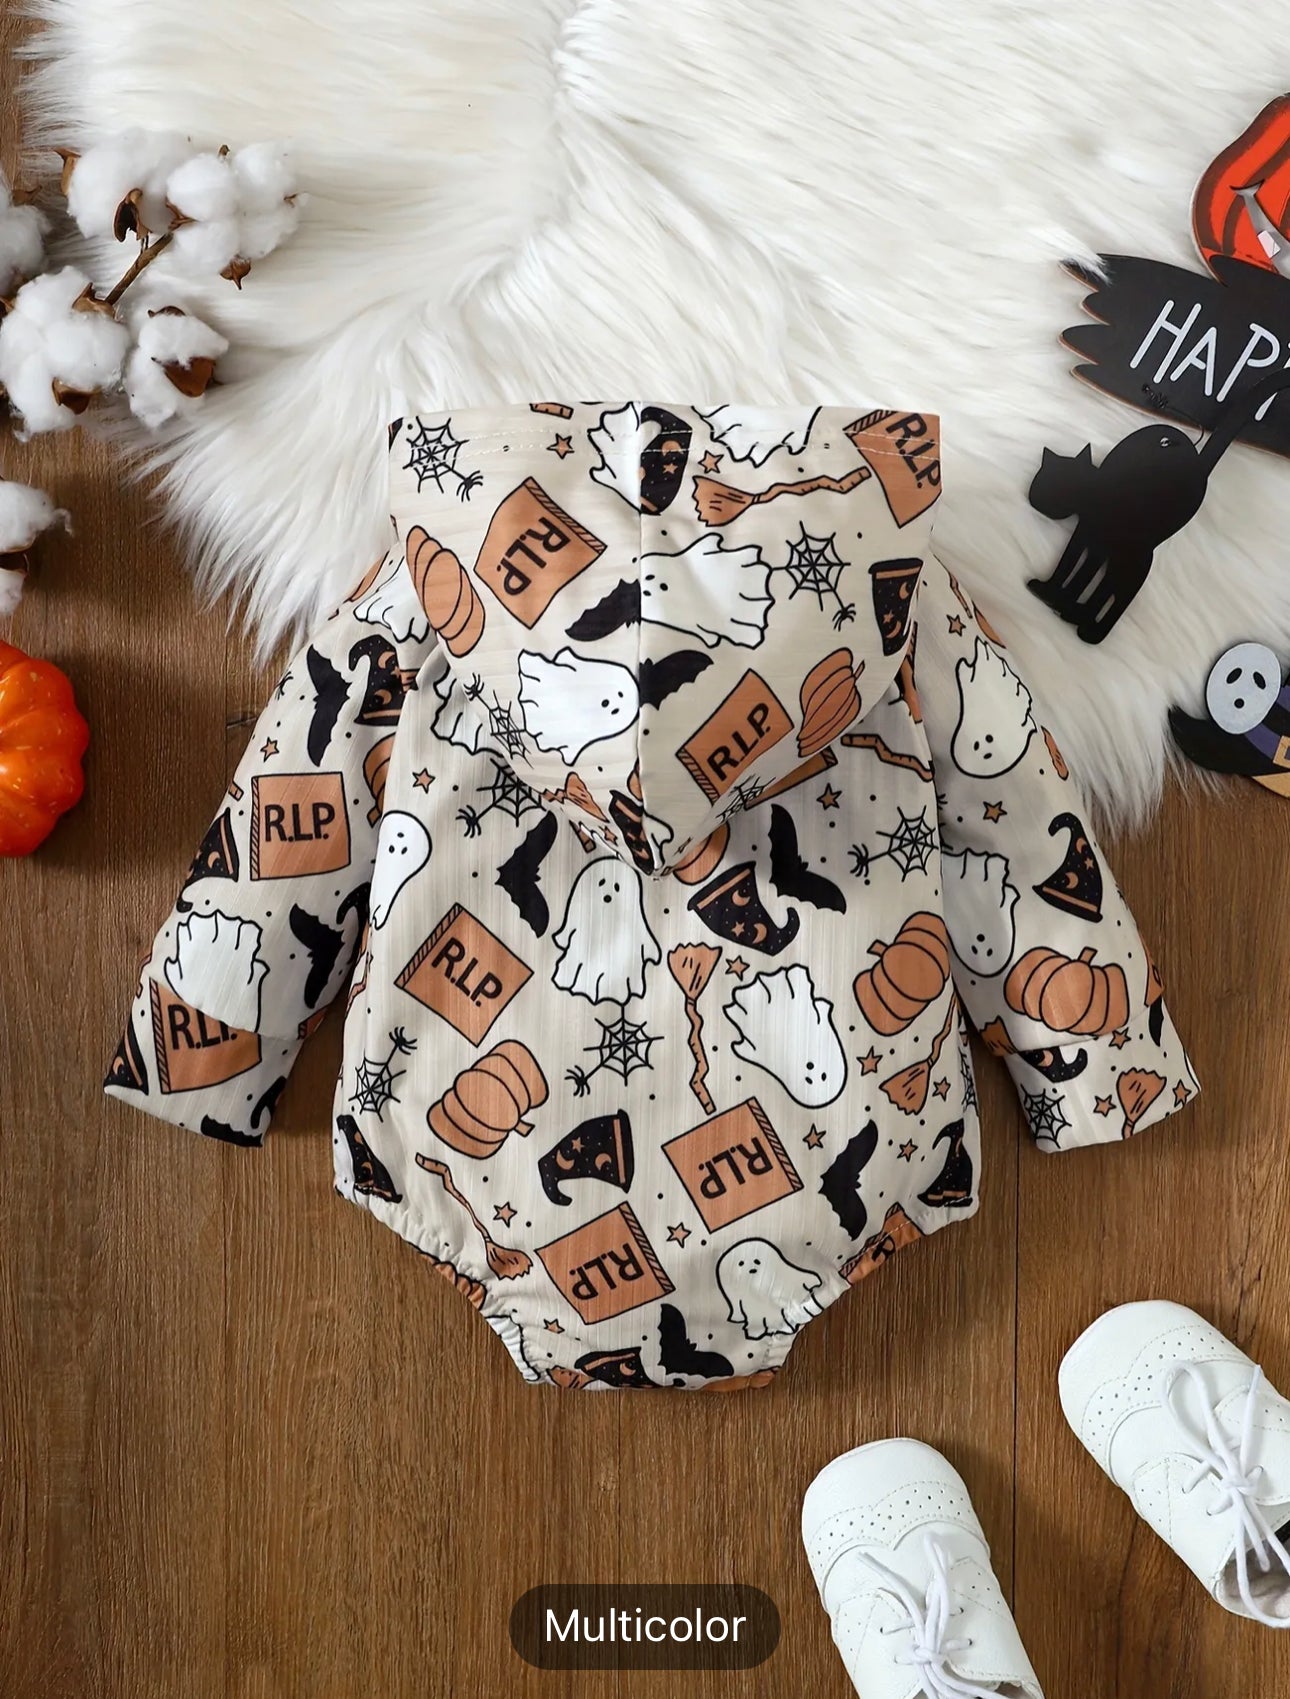 Brighten Up Your Little One's Halloween with this Adorable Baby Outfit!